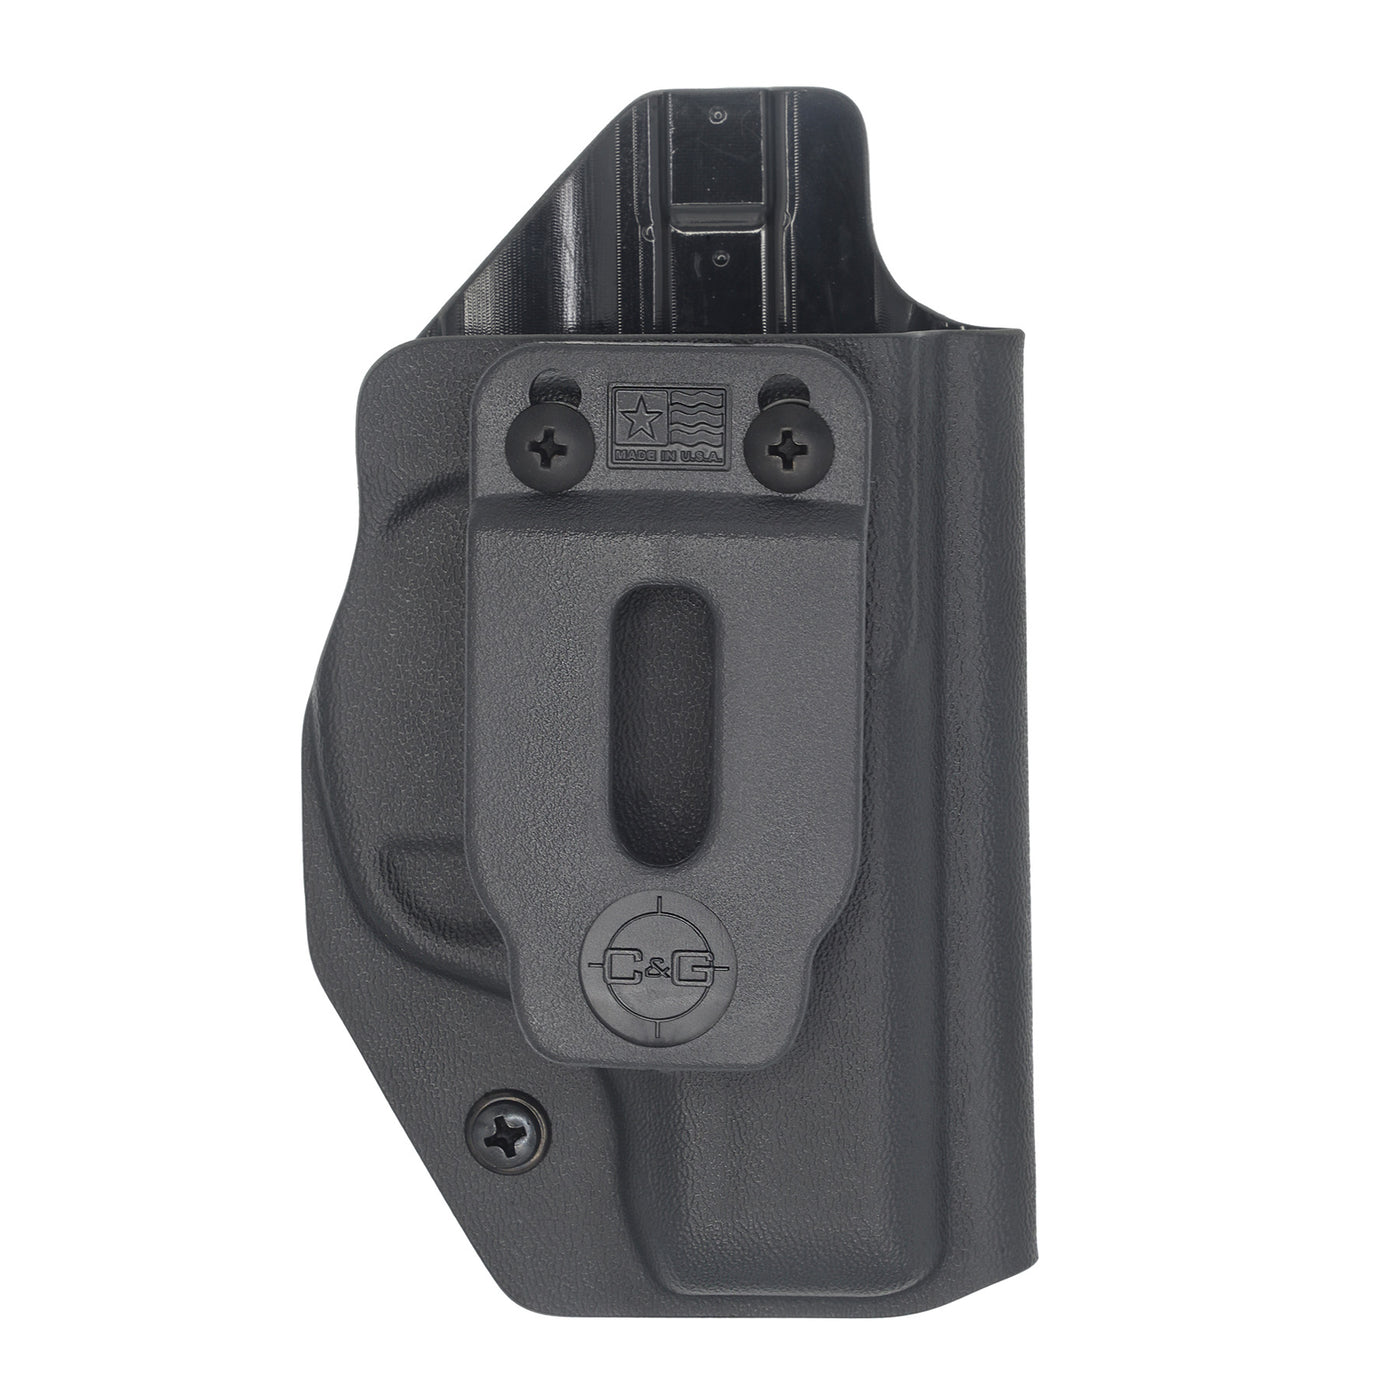 C&G Holsters IWB inside the waistband Holster for the Ruger LC9 EC9